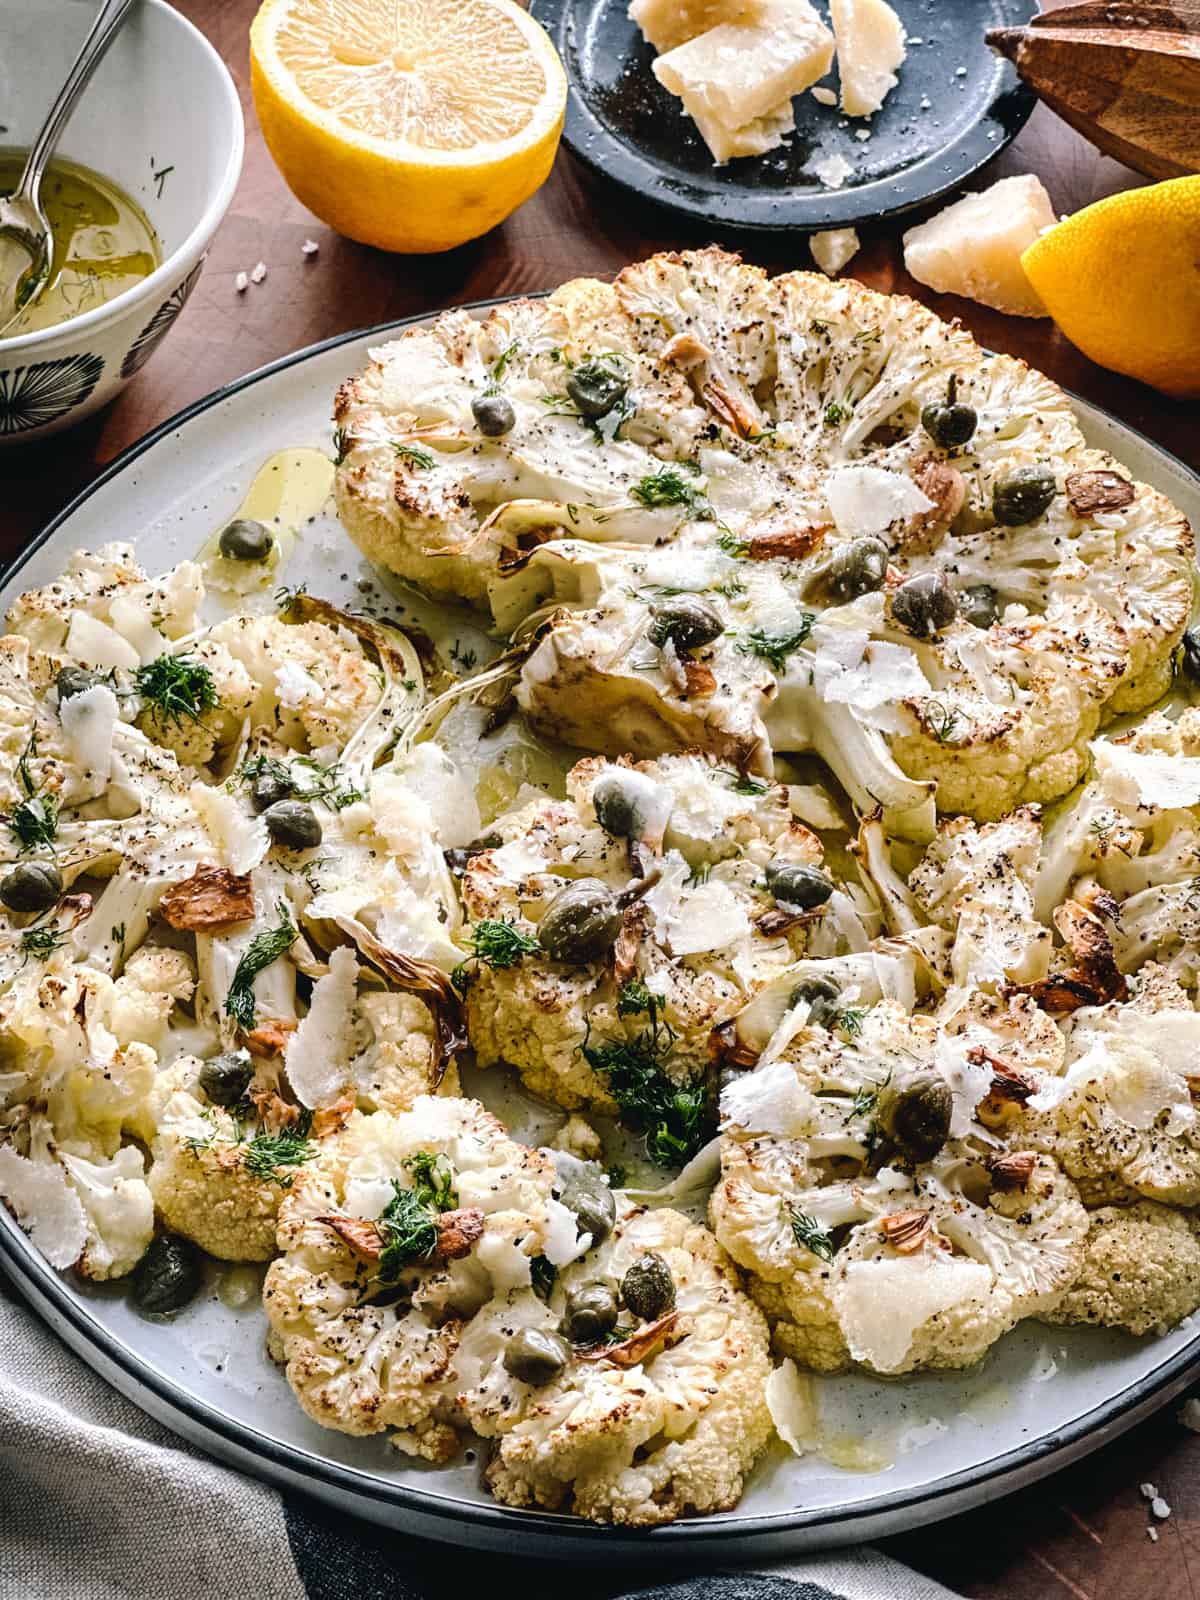 A plate with roasted cauliflower steaks with dill, capers and parmesan cheese. Partial view of two lemon halves, a plate with cheese, a citrus juicer and a cloth napkin.